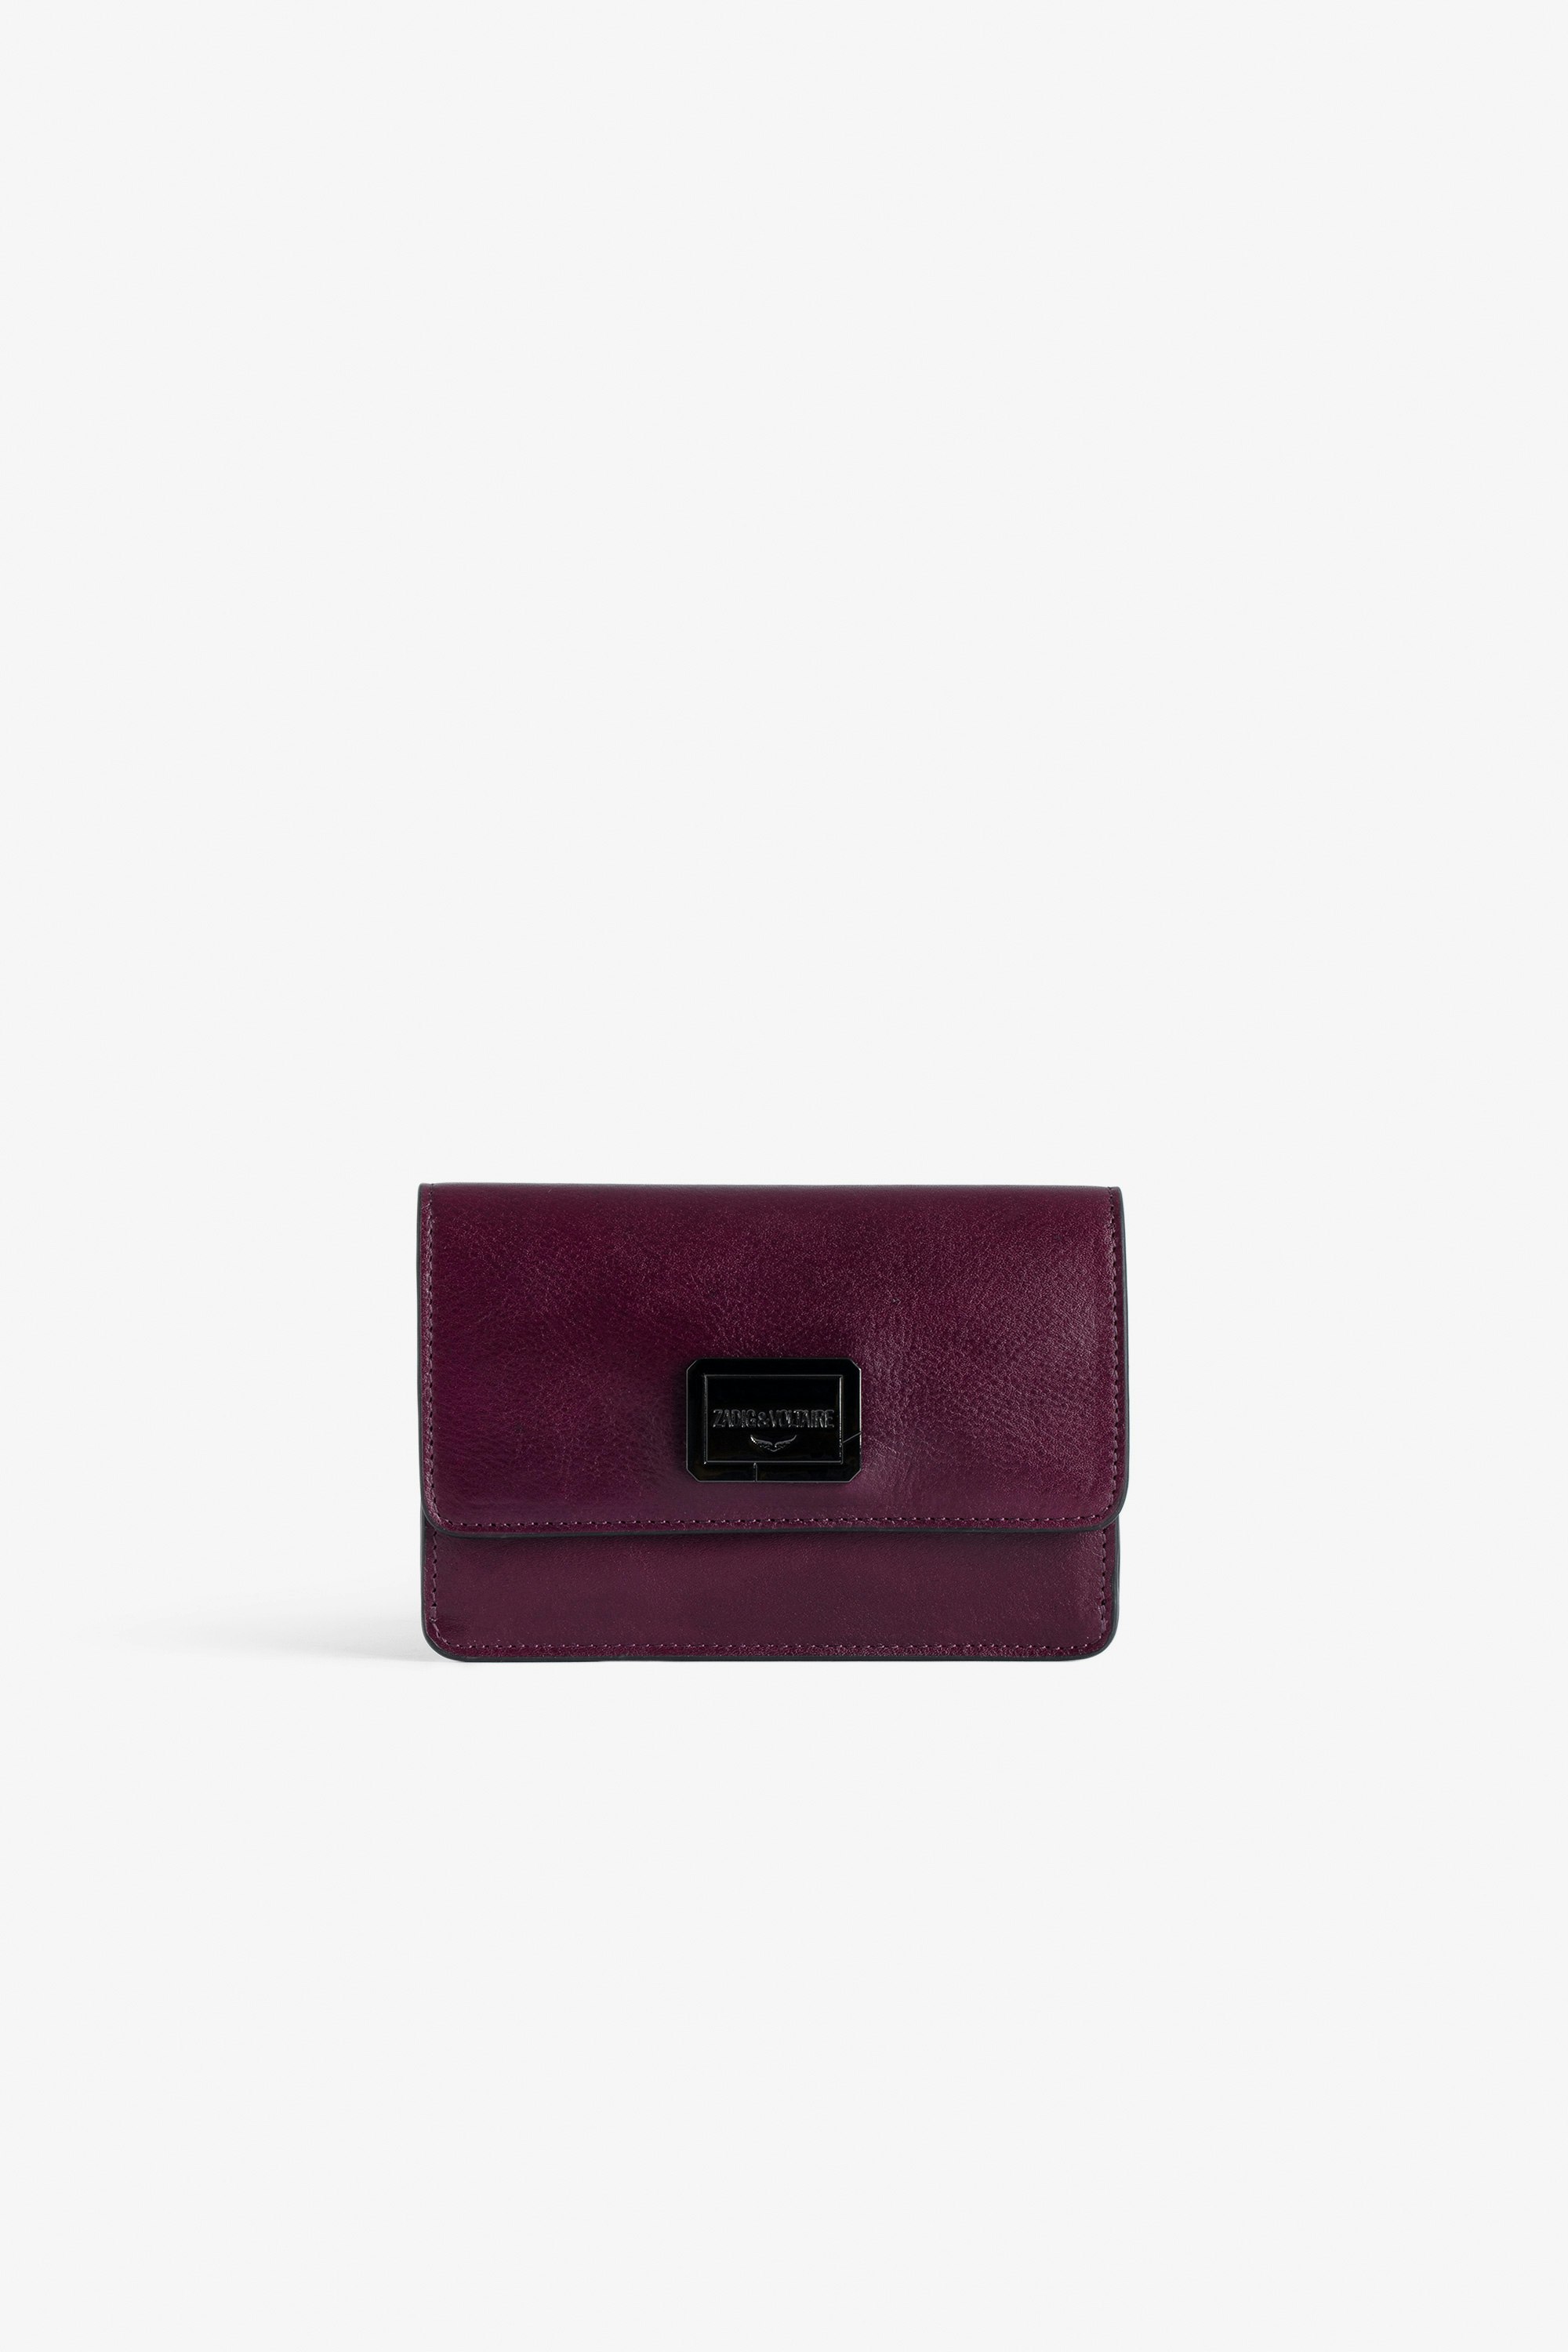 Le Cecilia Wallet Women’s burgundy leather wallet with flap